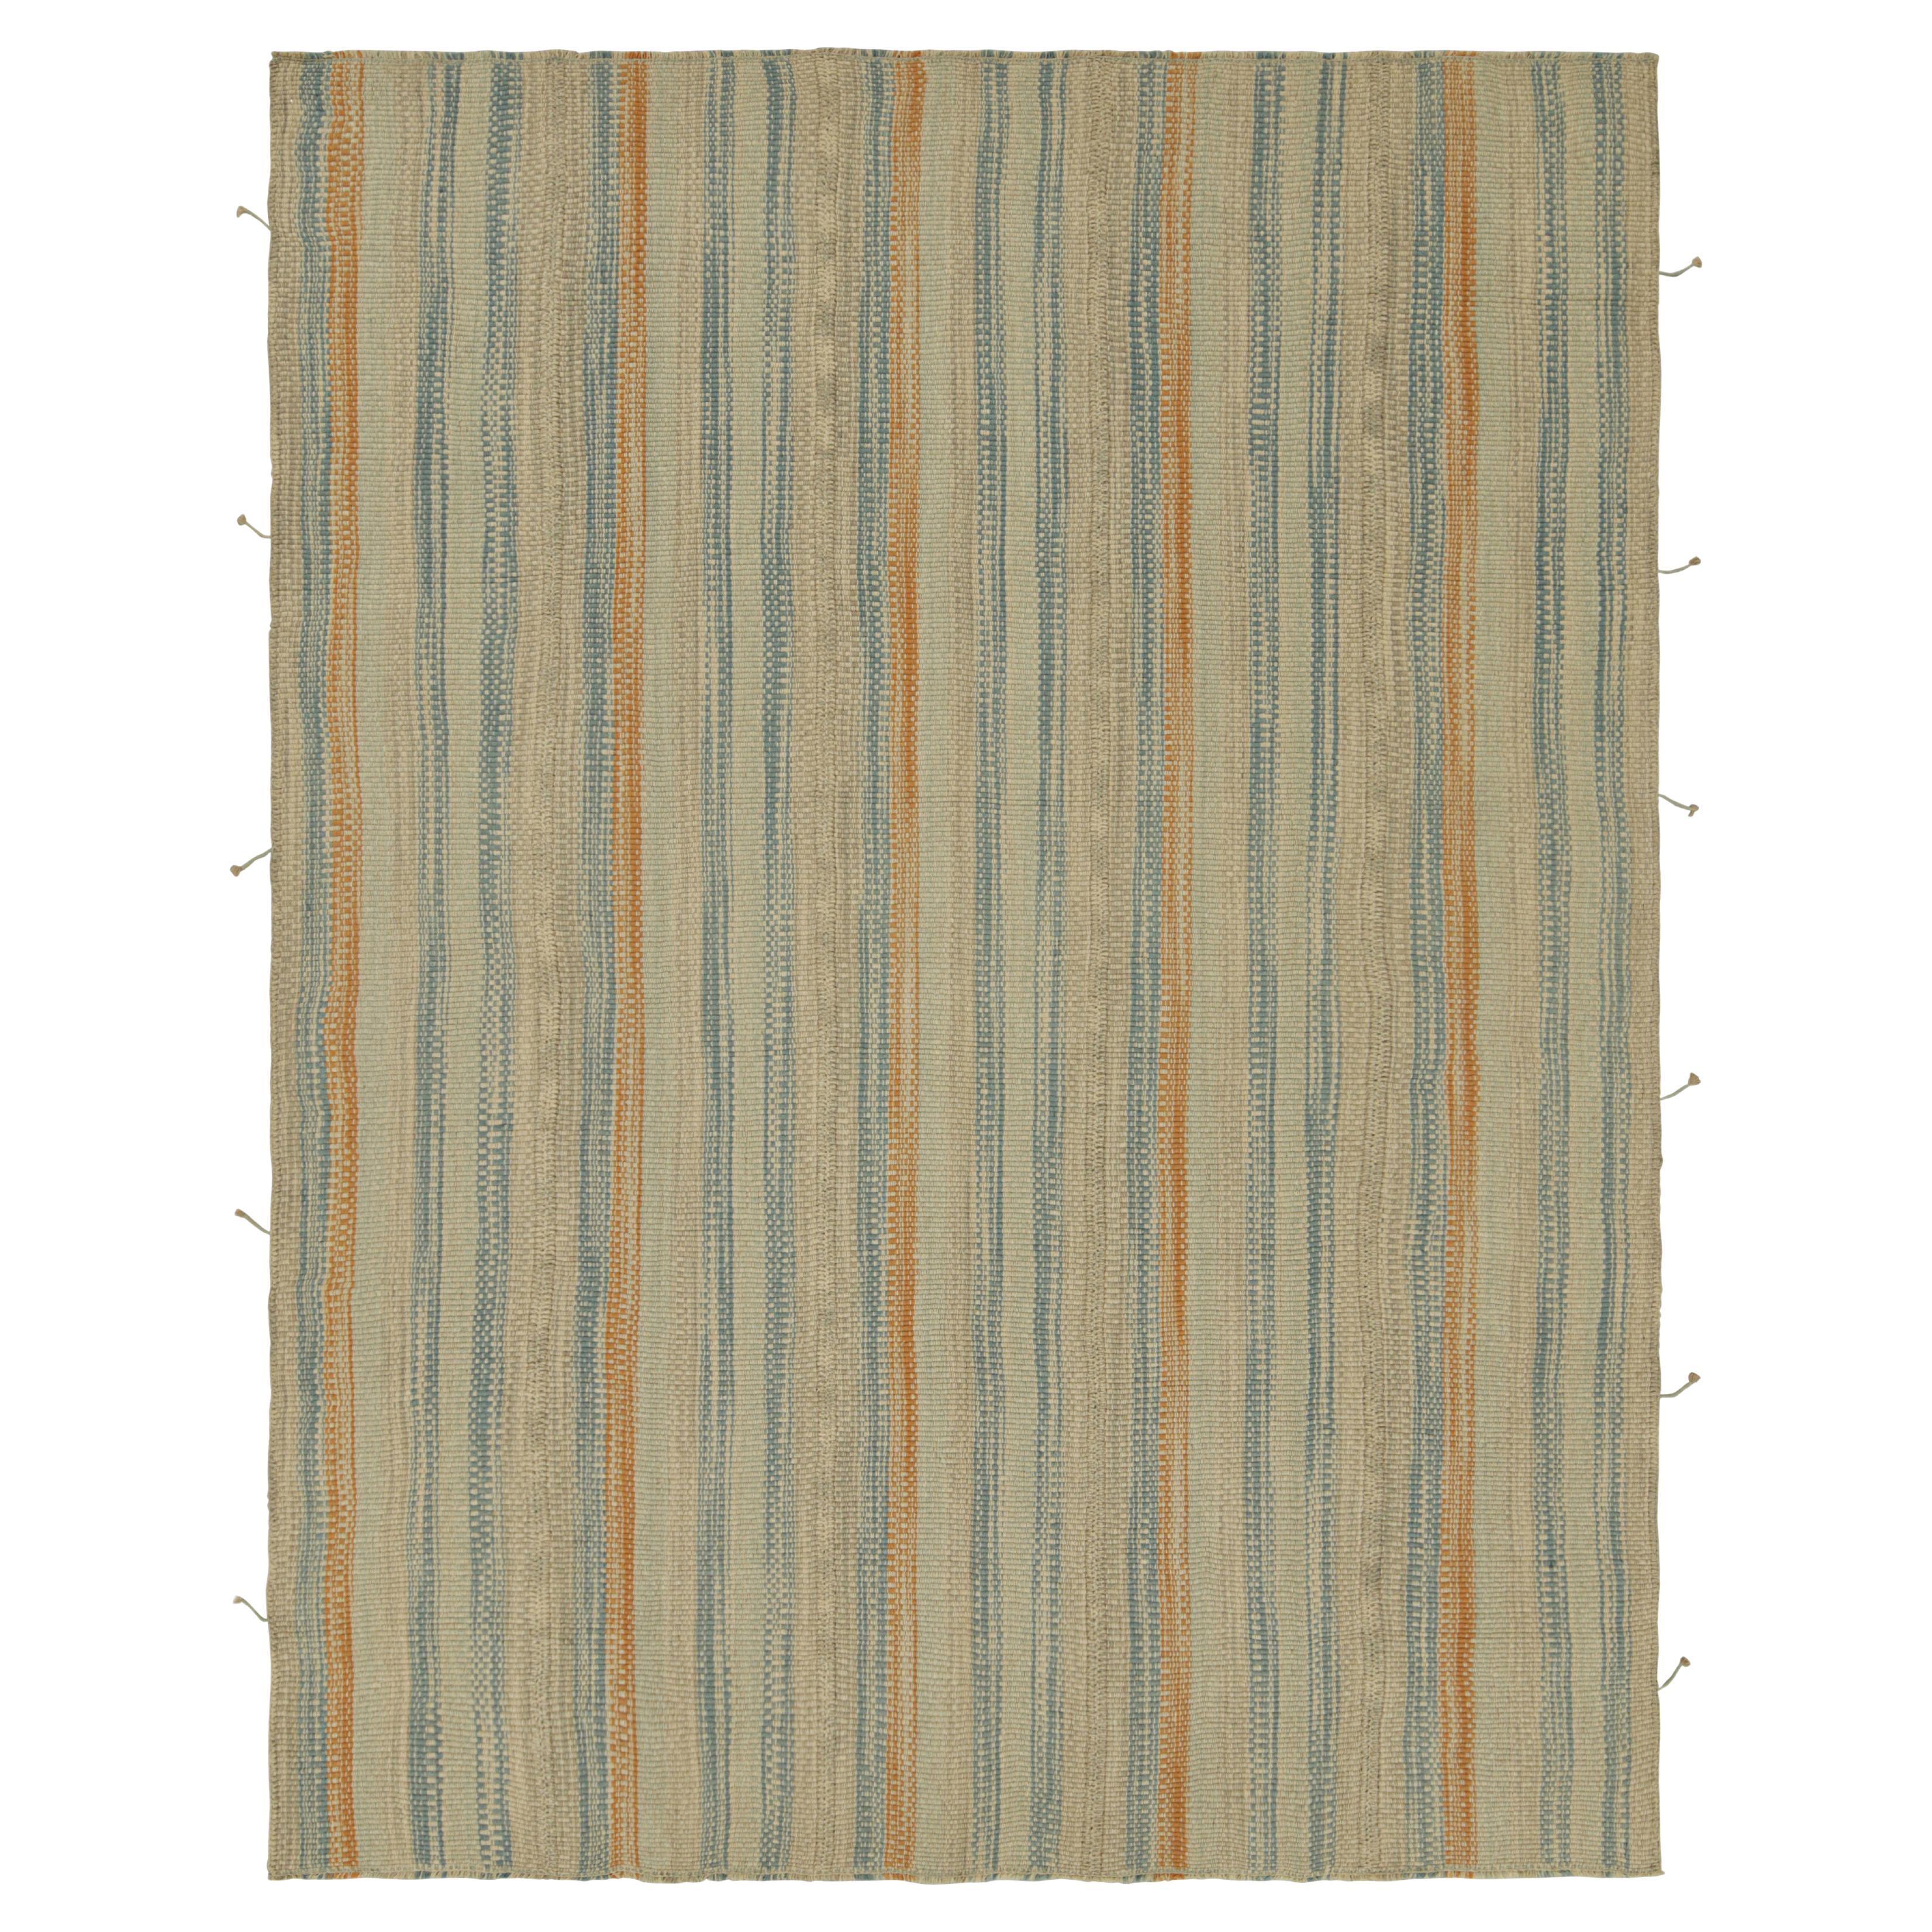 Rug & Kilim’s Contemporary Kilim in Beige, Rust and Blue Textural Stripes